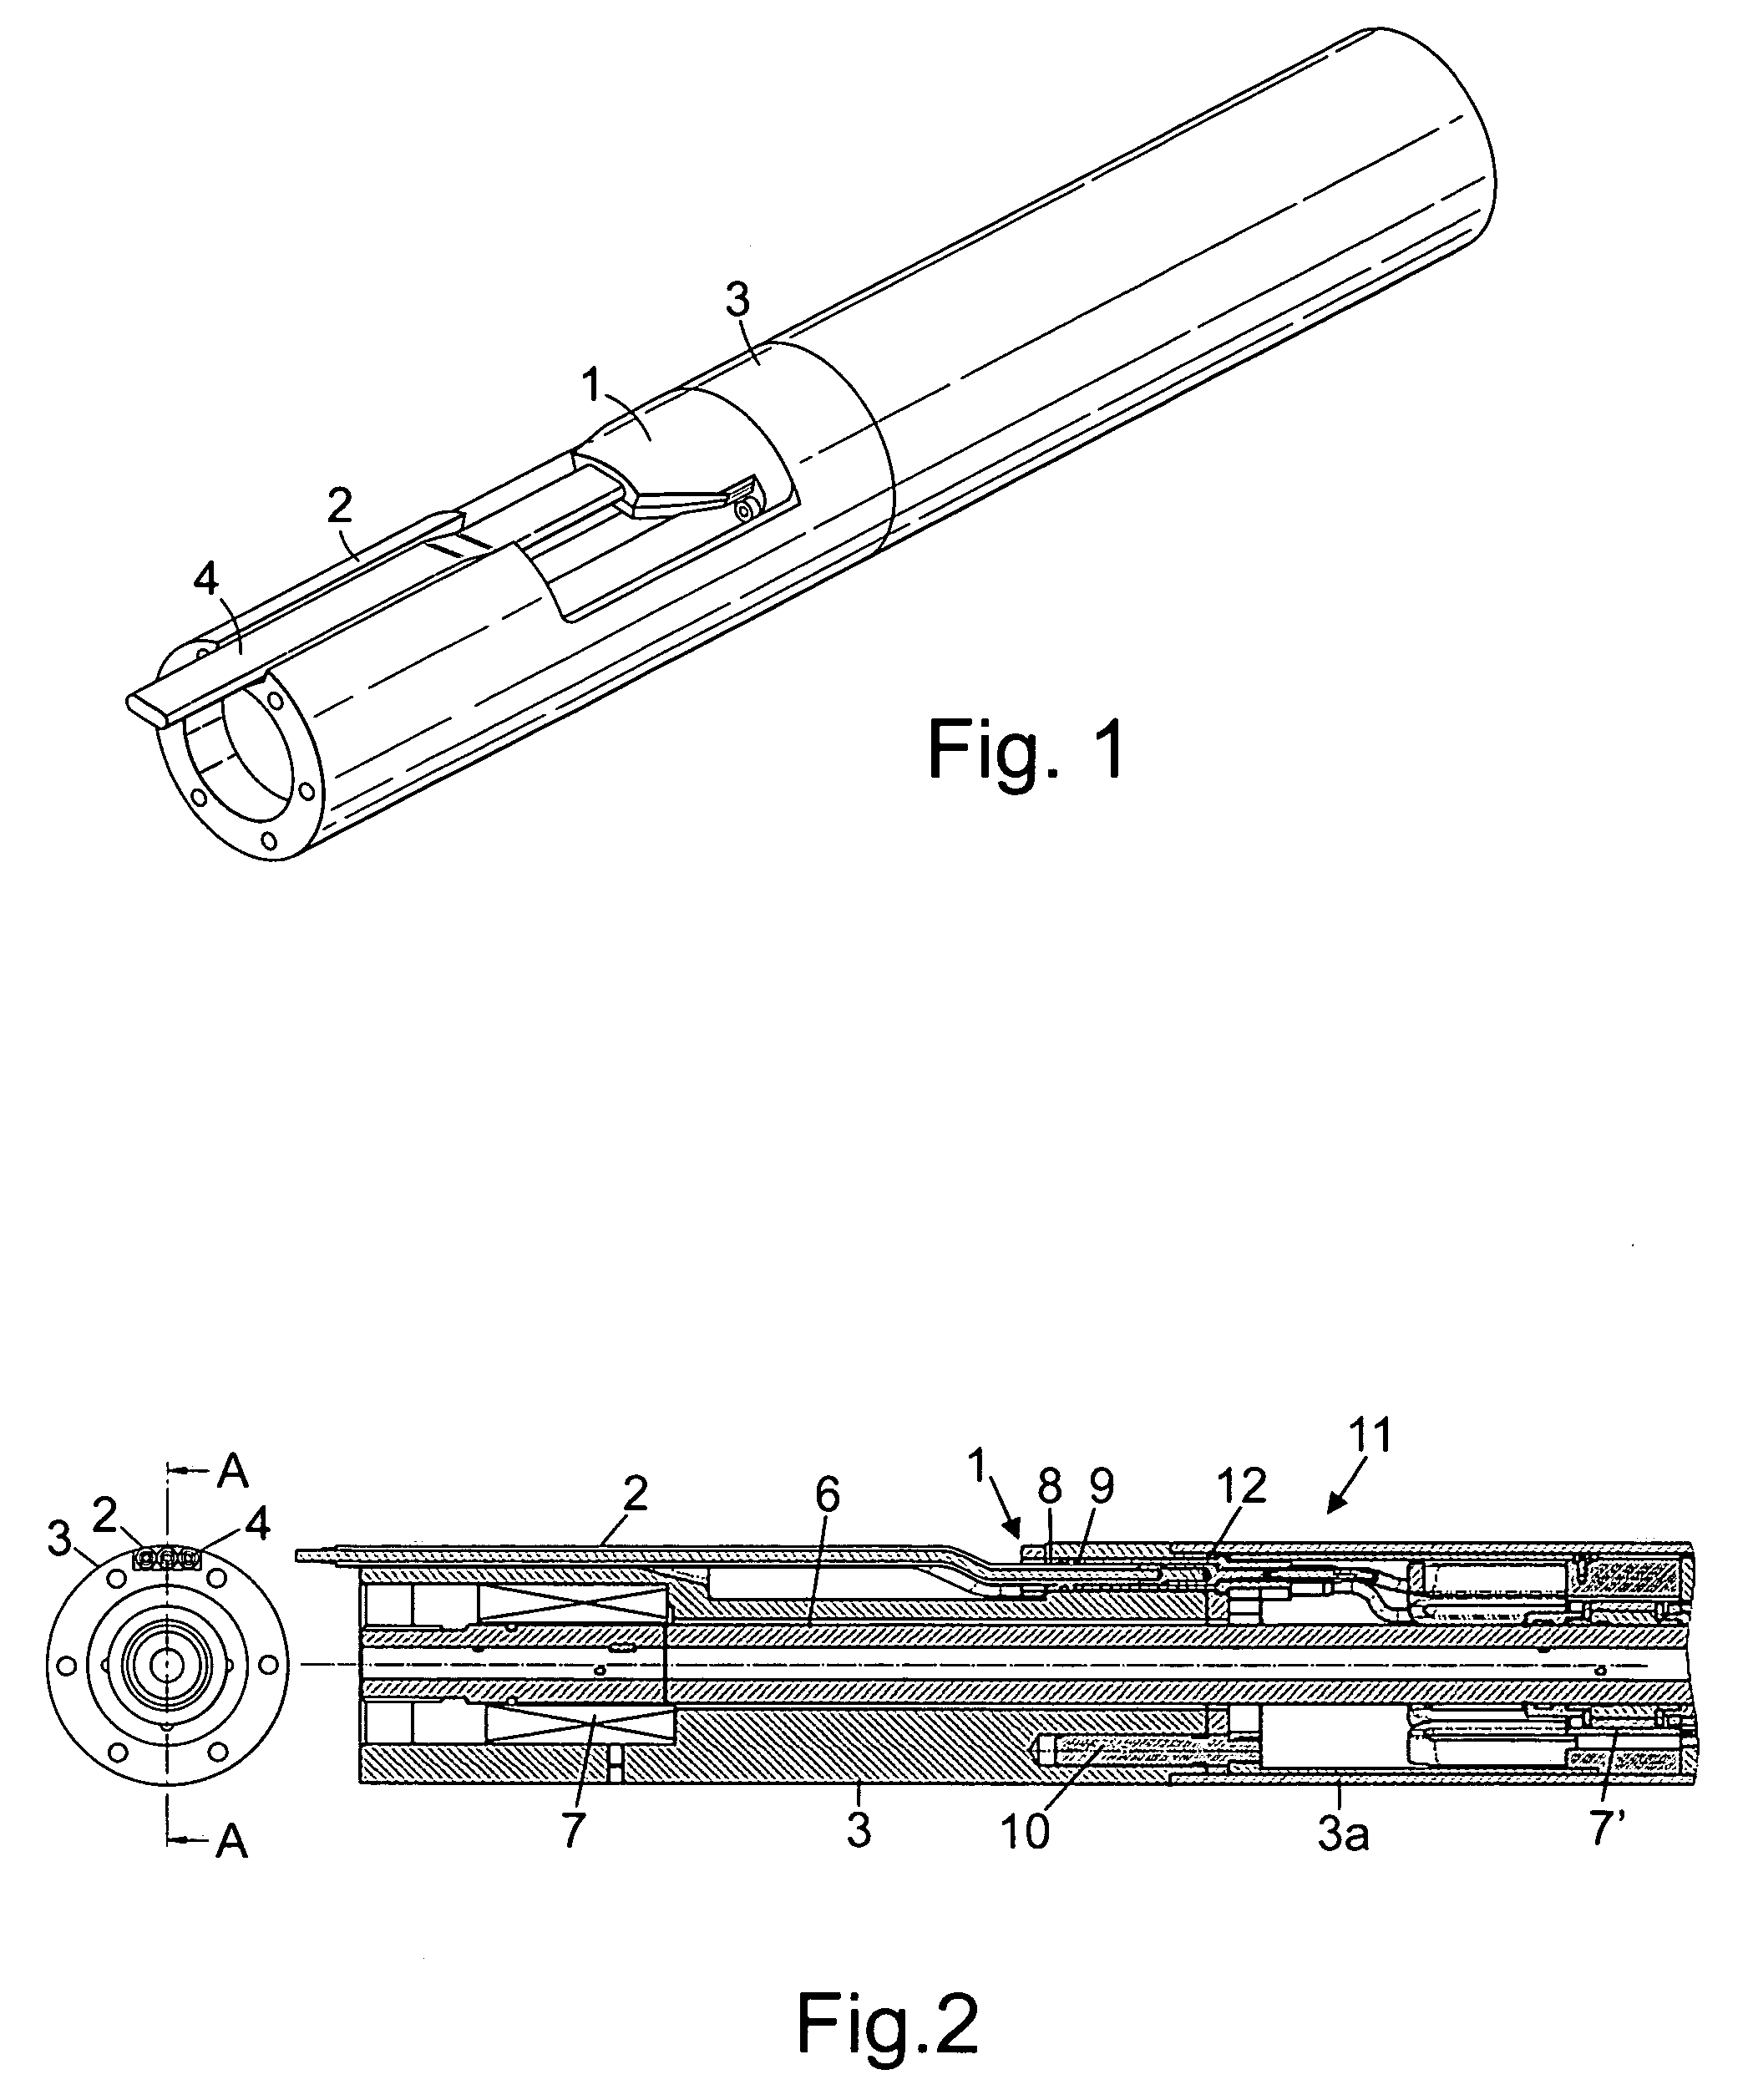 Electrical connector and socket assemblies